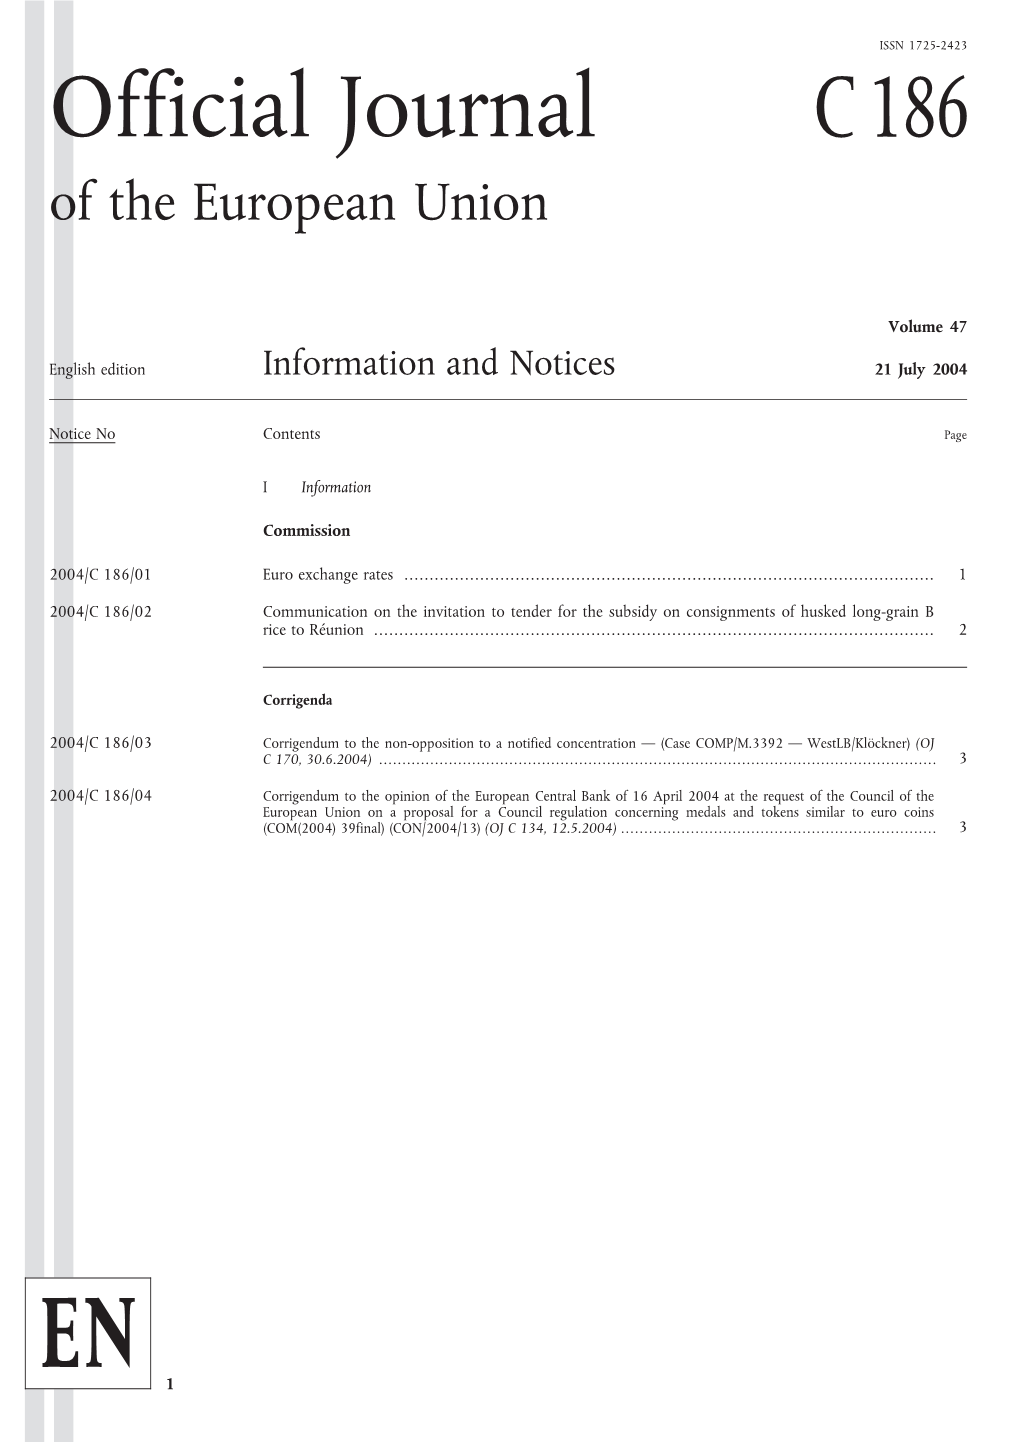 Official Journal C186 of the European Union